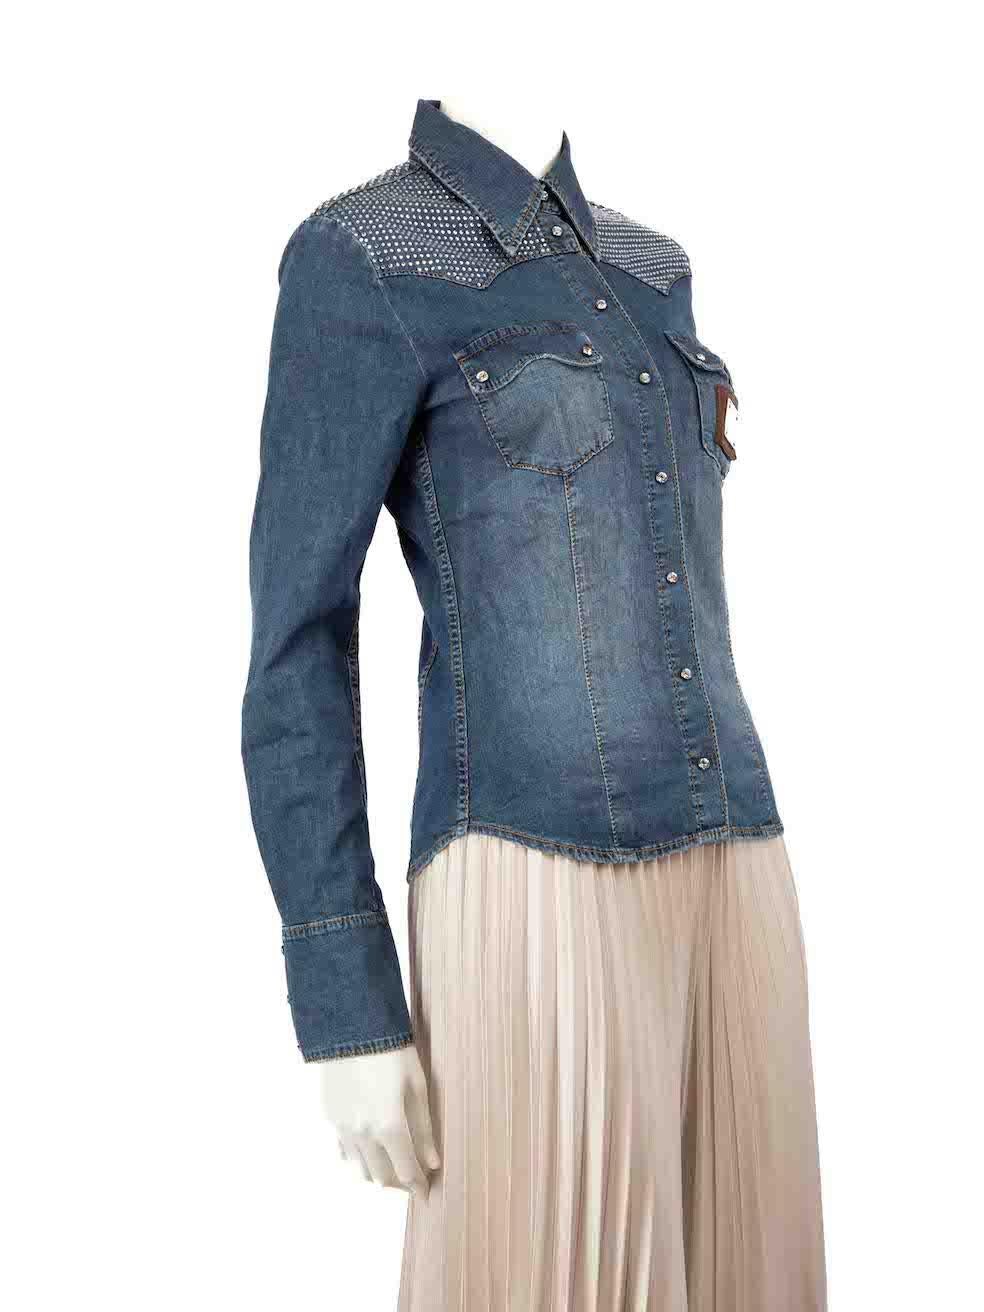 CONDITION is Very good. Minimal wear to the shirt is evident. Missing rhinestones on the right shoulder on this used Philipp Plein designer resale item.
 
 
 
 Details
 
 
 Blue
 
 Denim
 
 Shirt
 
 Snap button fastening
 
 Crystal embellished